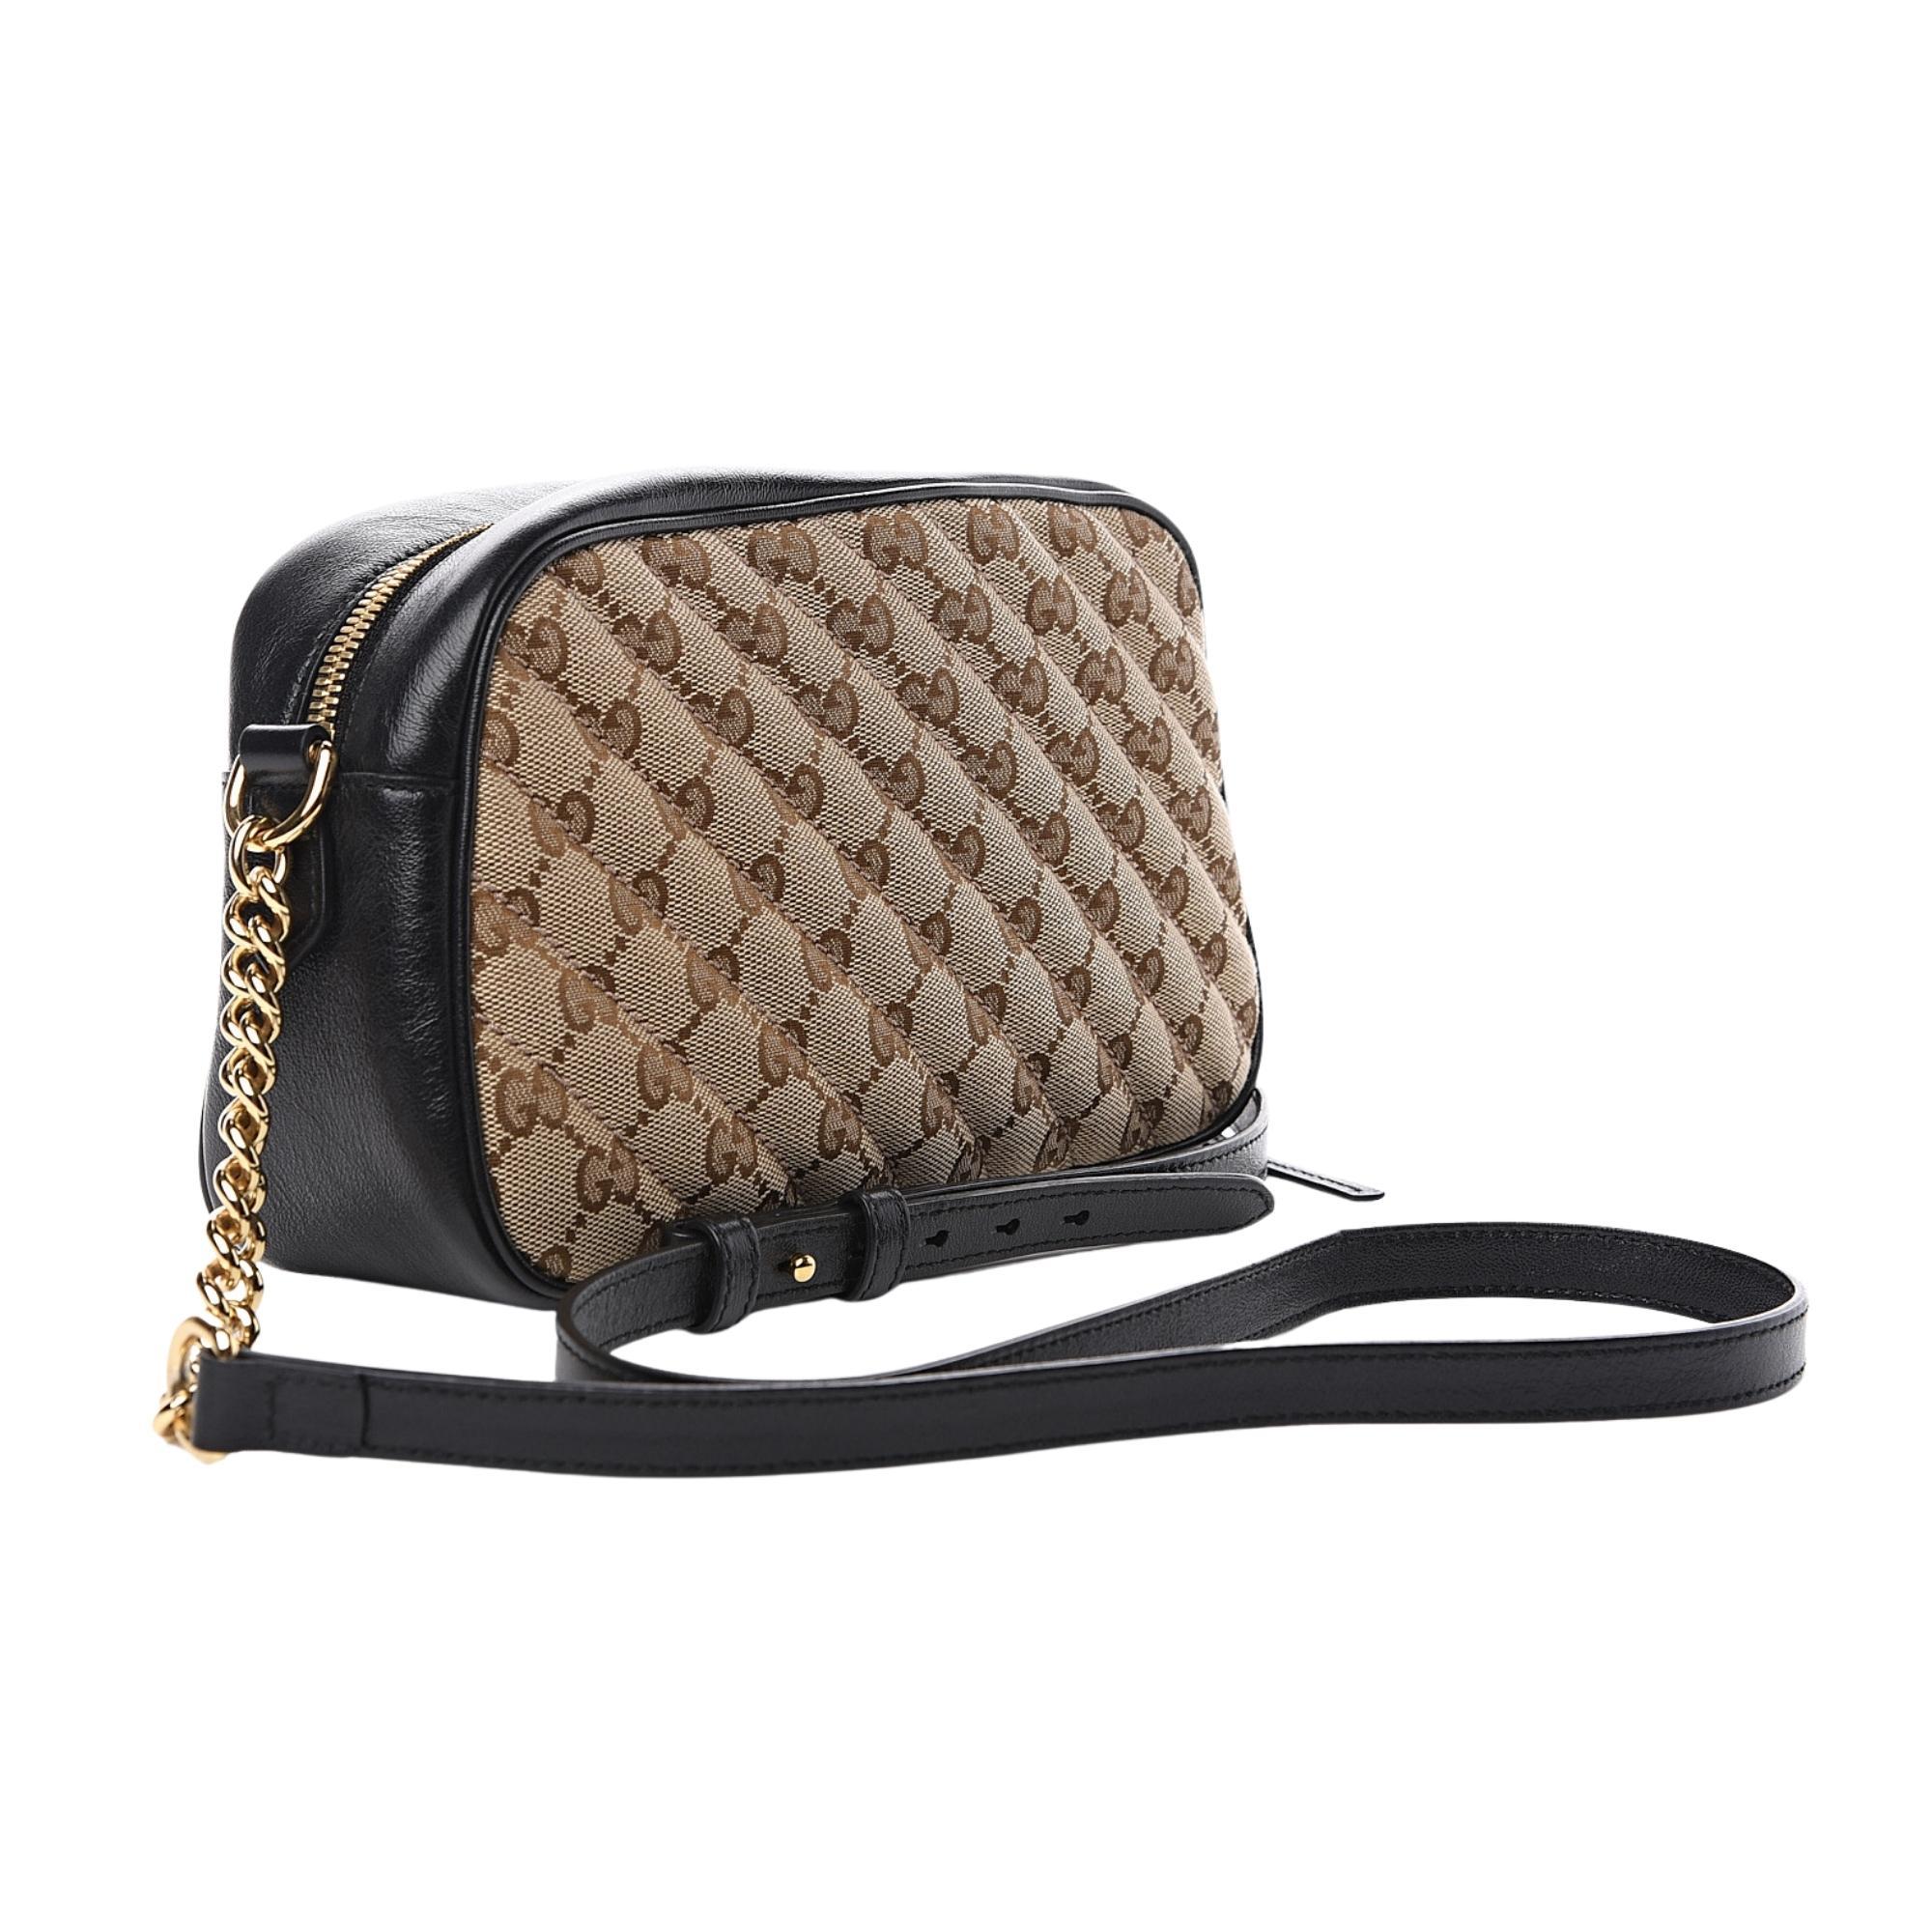 This shoulder bag is constructed with Gucci's Original GG canvas with a quilted diagonal matelassé technique and trimmed with black leather. The bag features gold-toned hardware, a chain-link shoulder strap, a black leather shoulder pad for